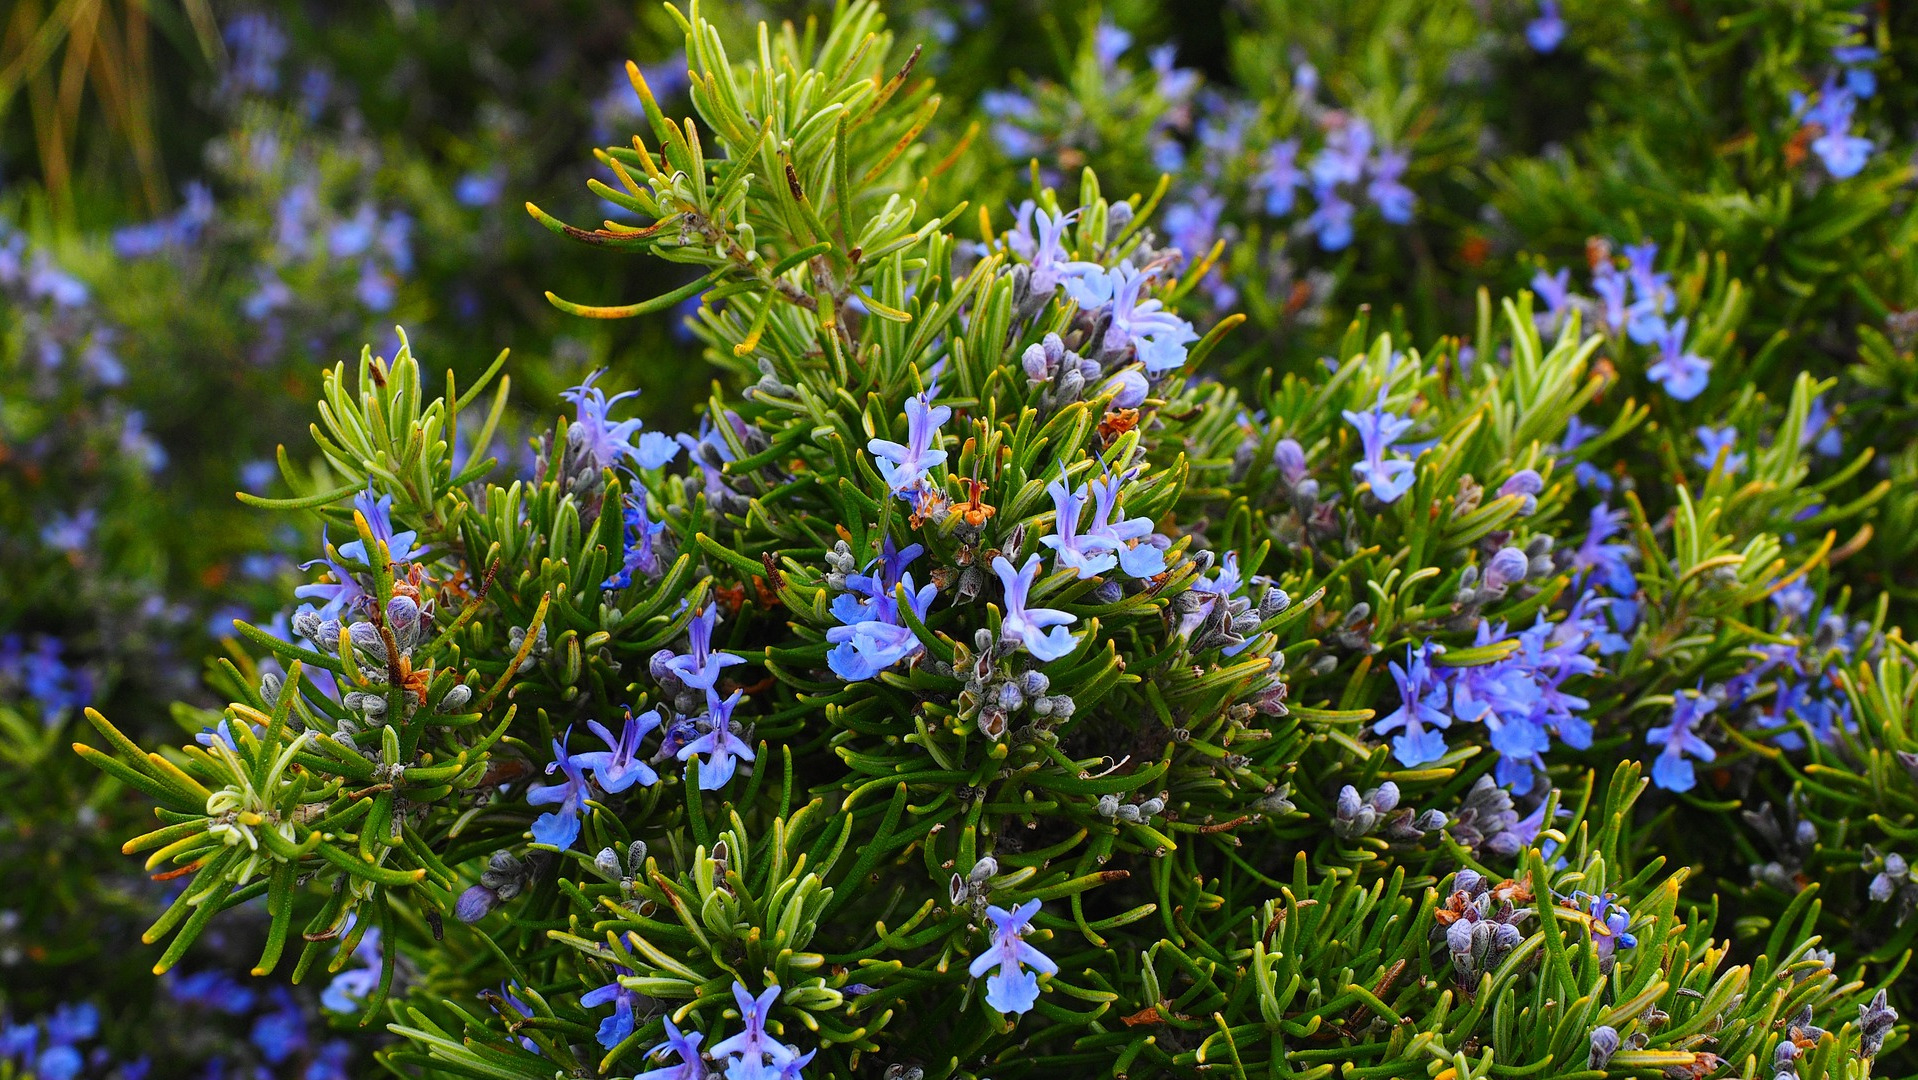 Blooming Rosemary Bush used to make Rosemary Essential Oil